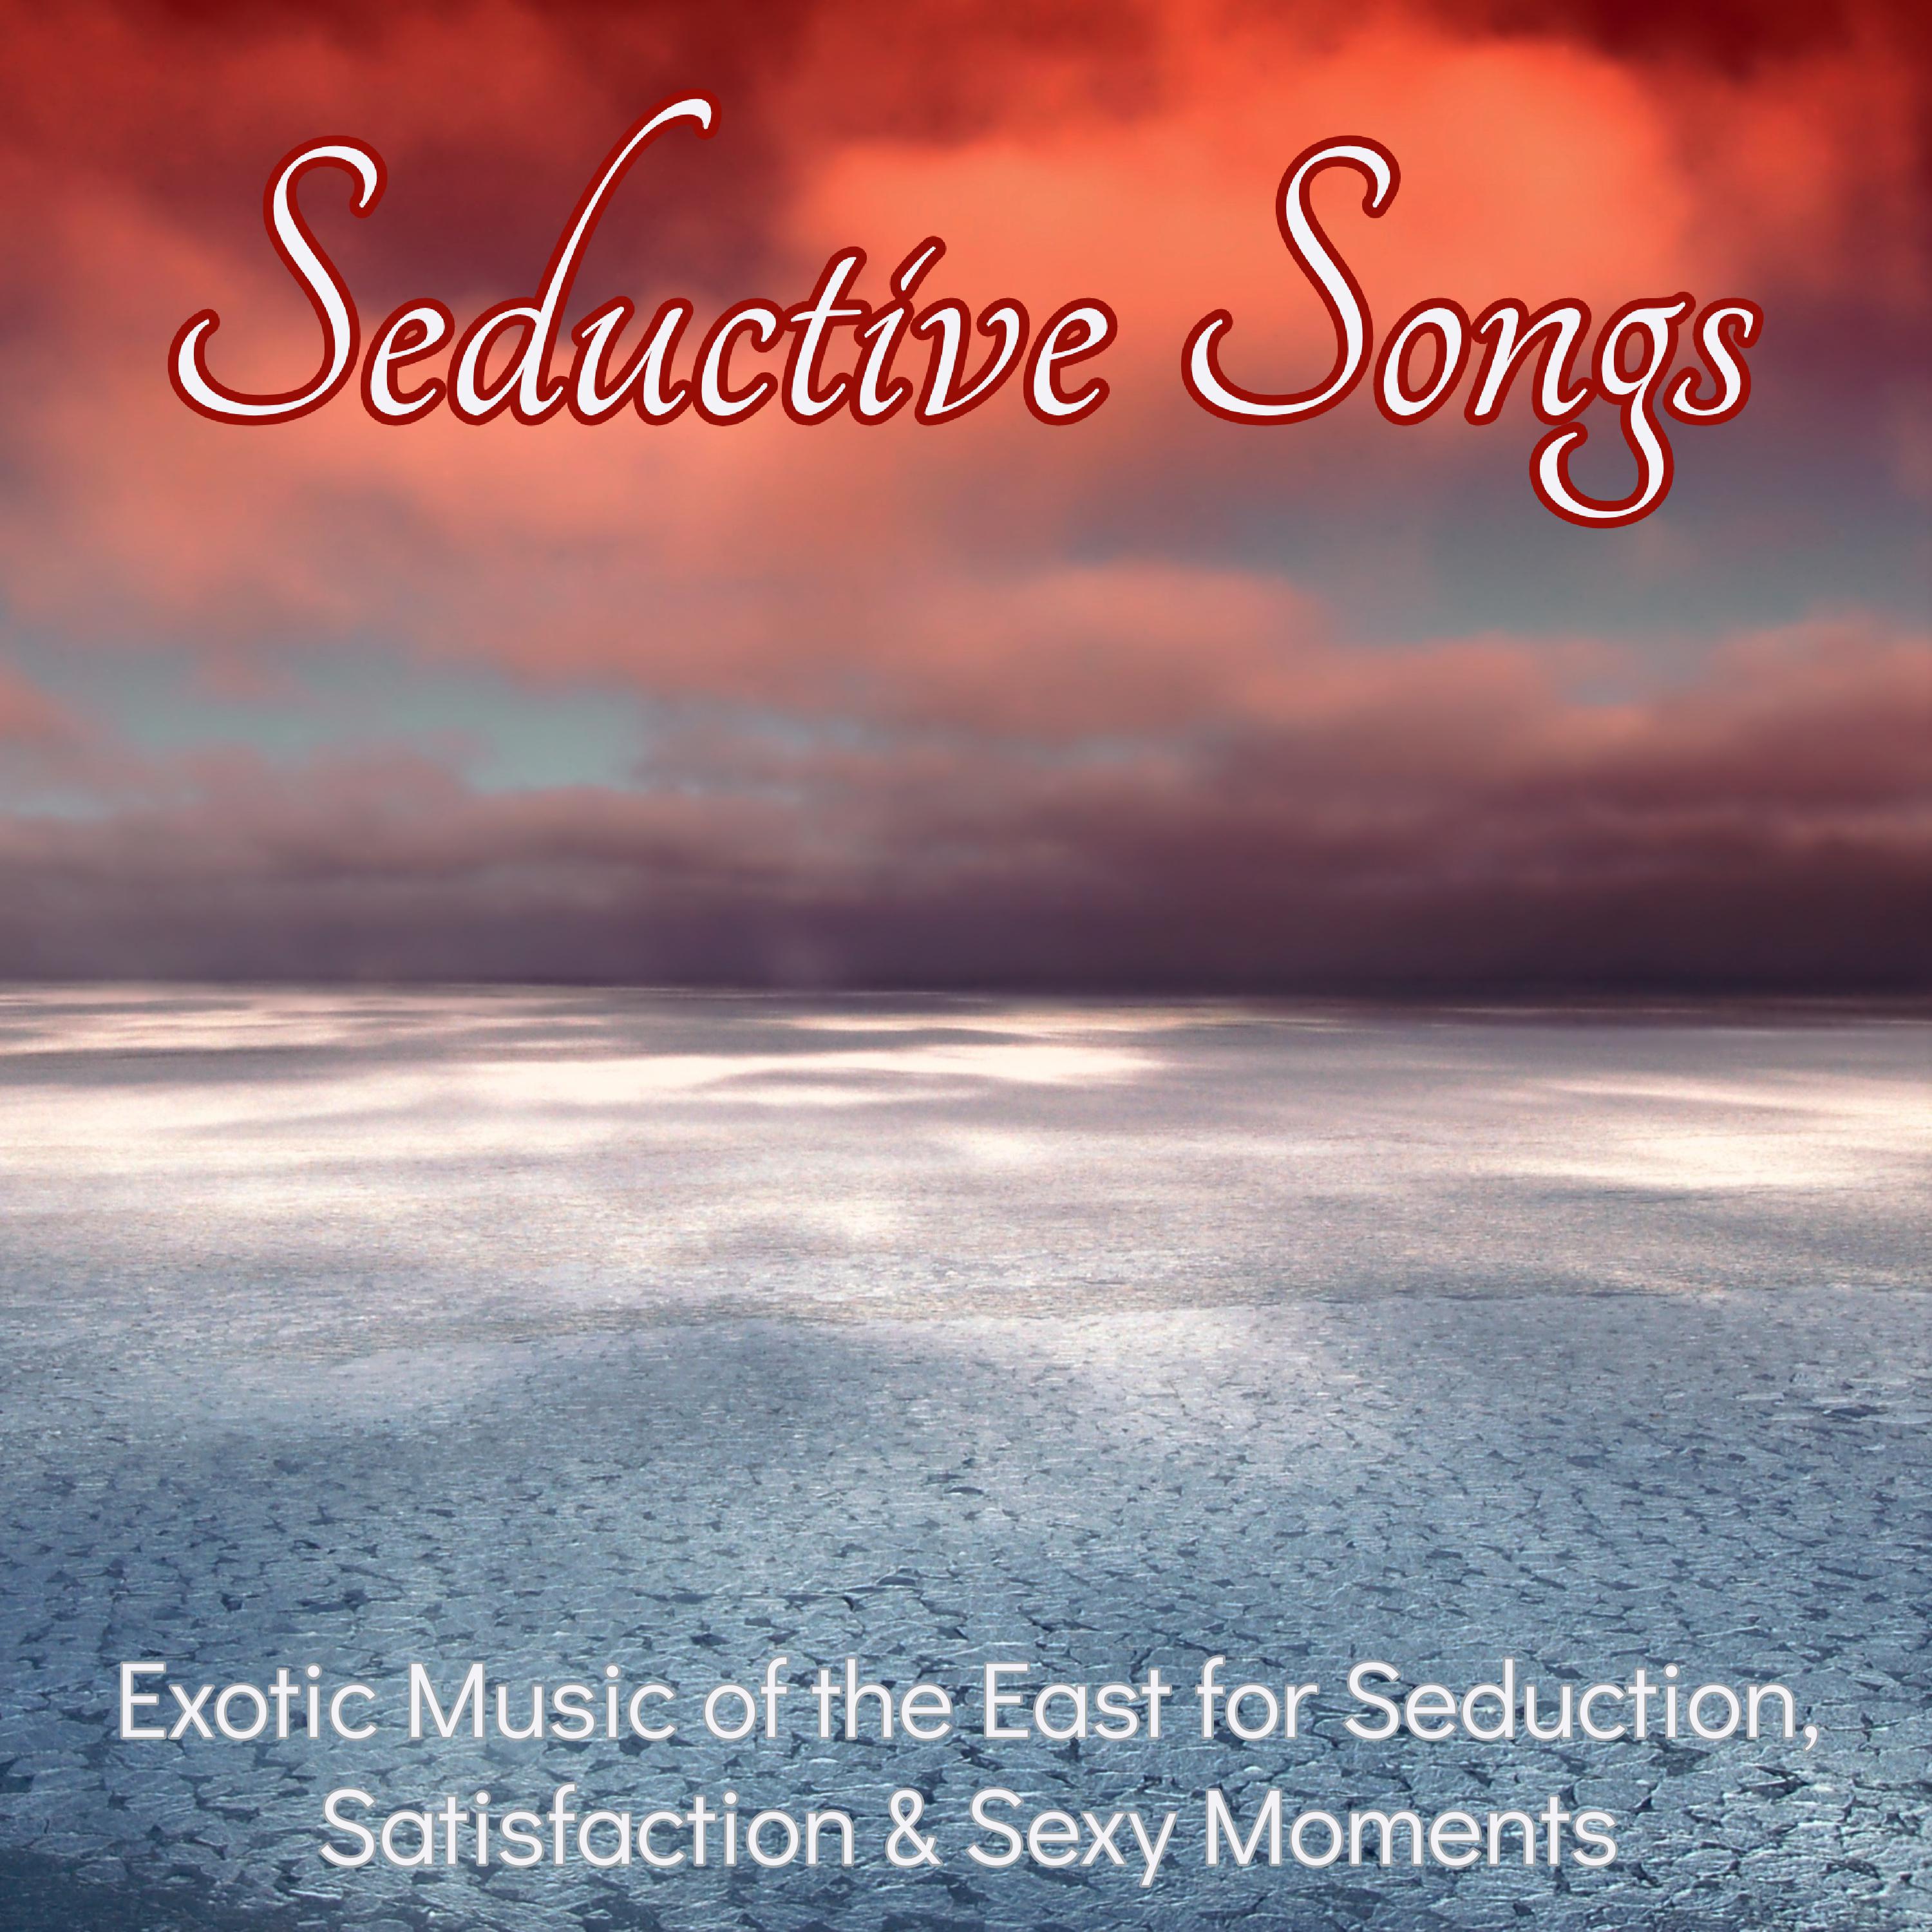 Seductive Songs – Exotic Music of the East for Seduction, Satisfaction & **** Moments